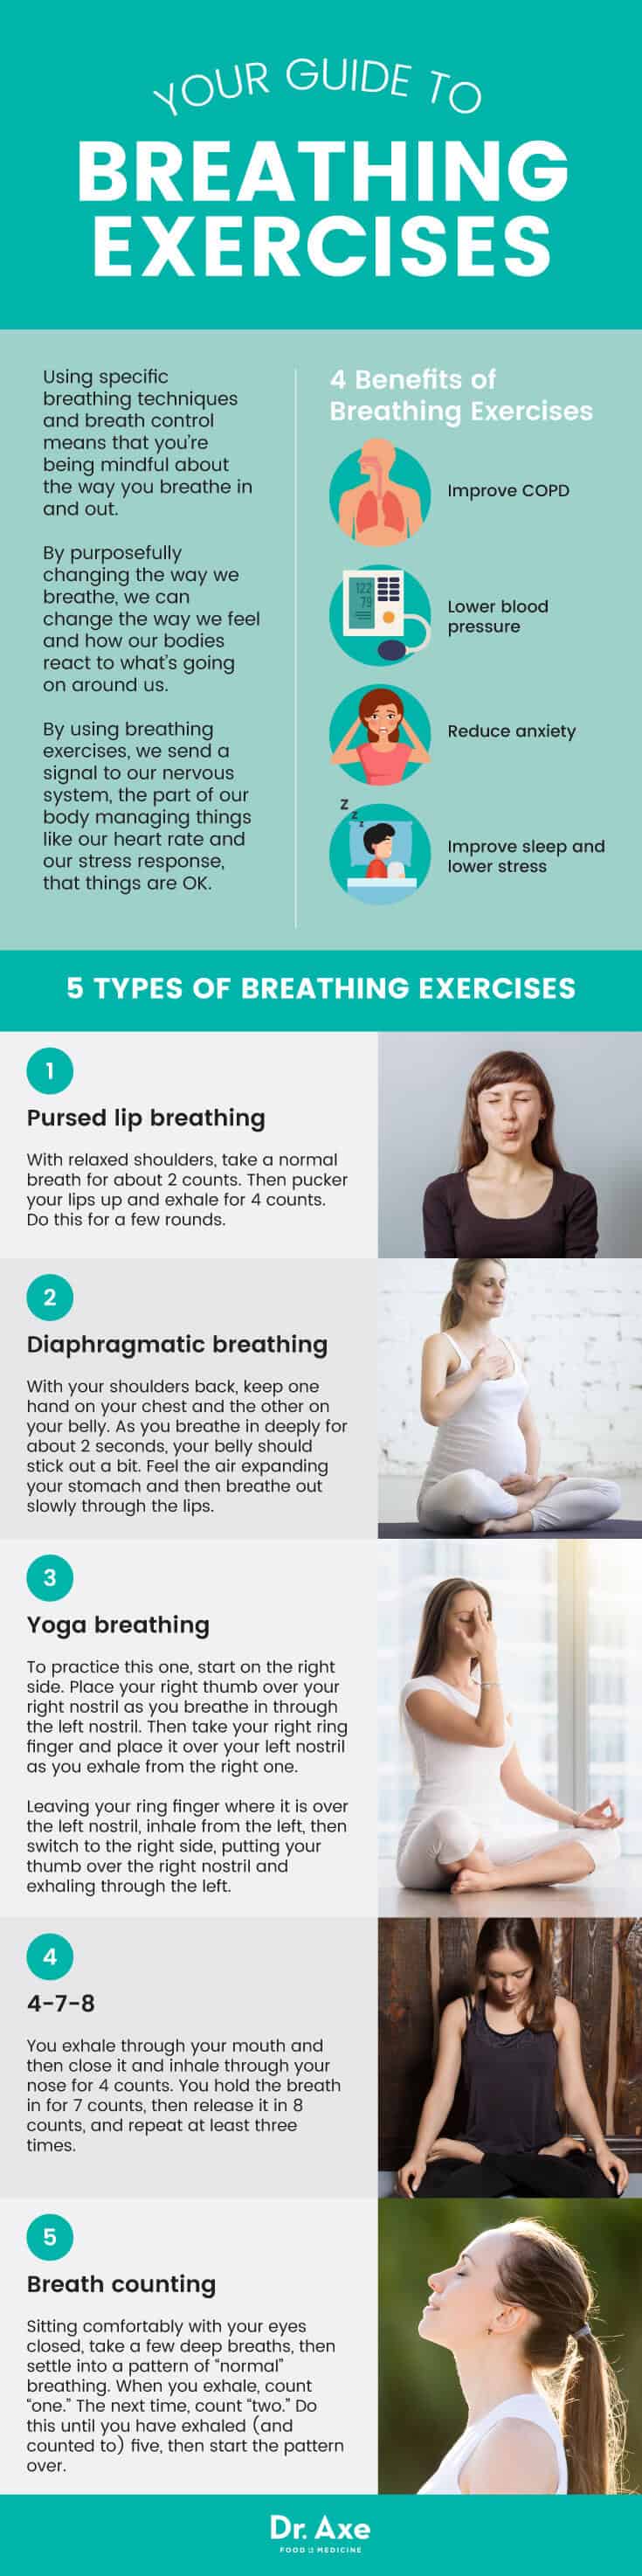 Guide to breathing exercises - Dr. Axe